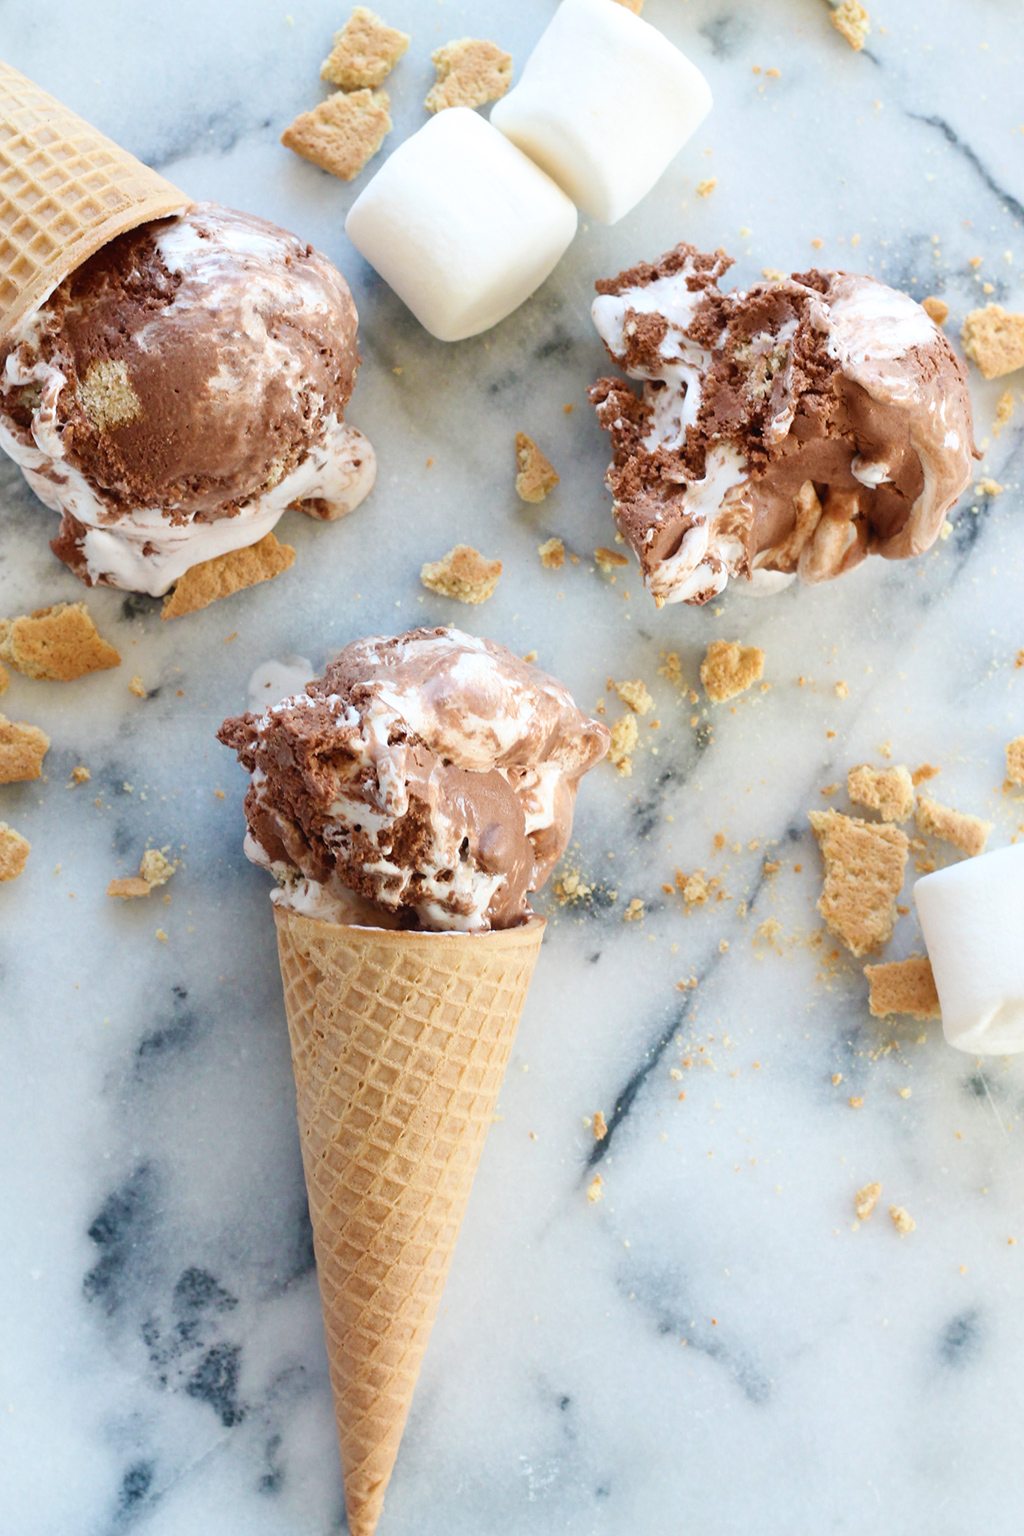 15 of Summer's Best Homemade Ice Cream Recipes - The ...
